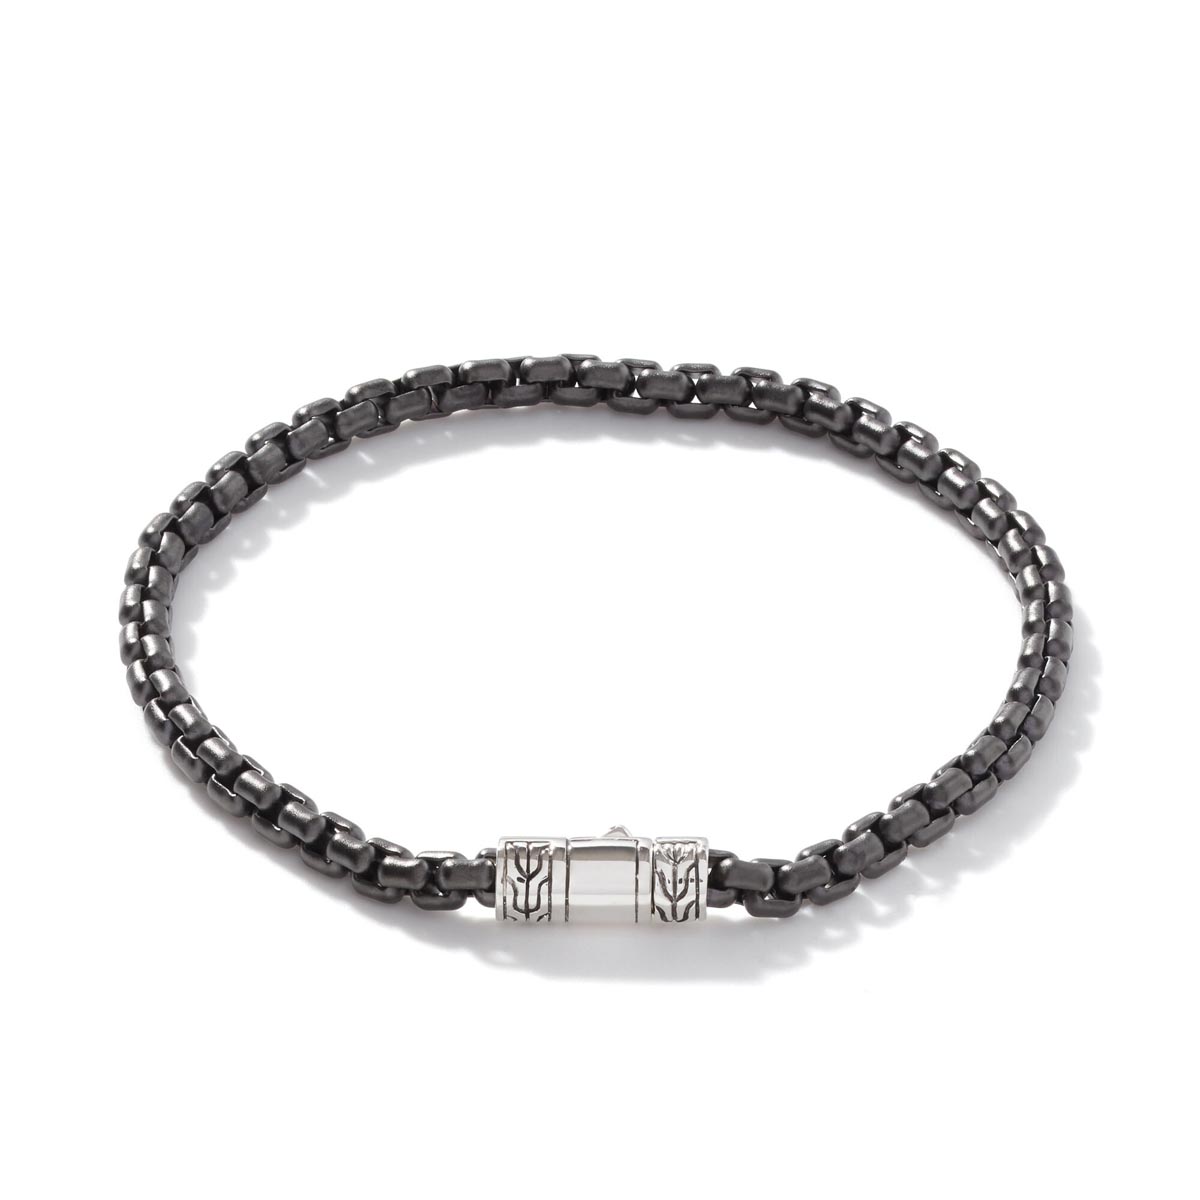 John Hardy Classic Chain Collection Box Chain Bracelet in Sterling Silver with Matte Black Rhodium